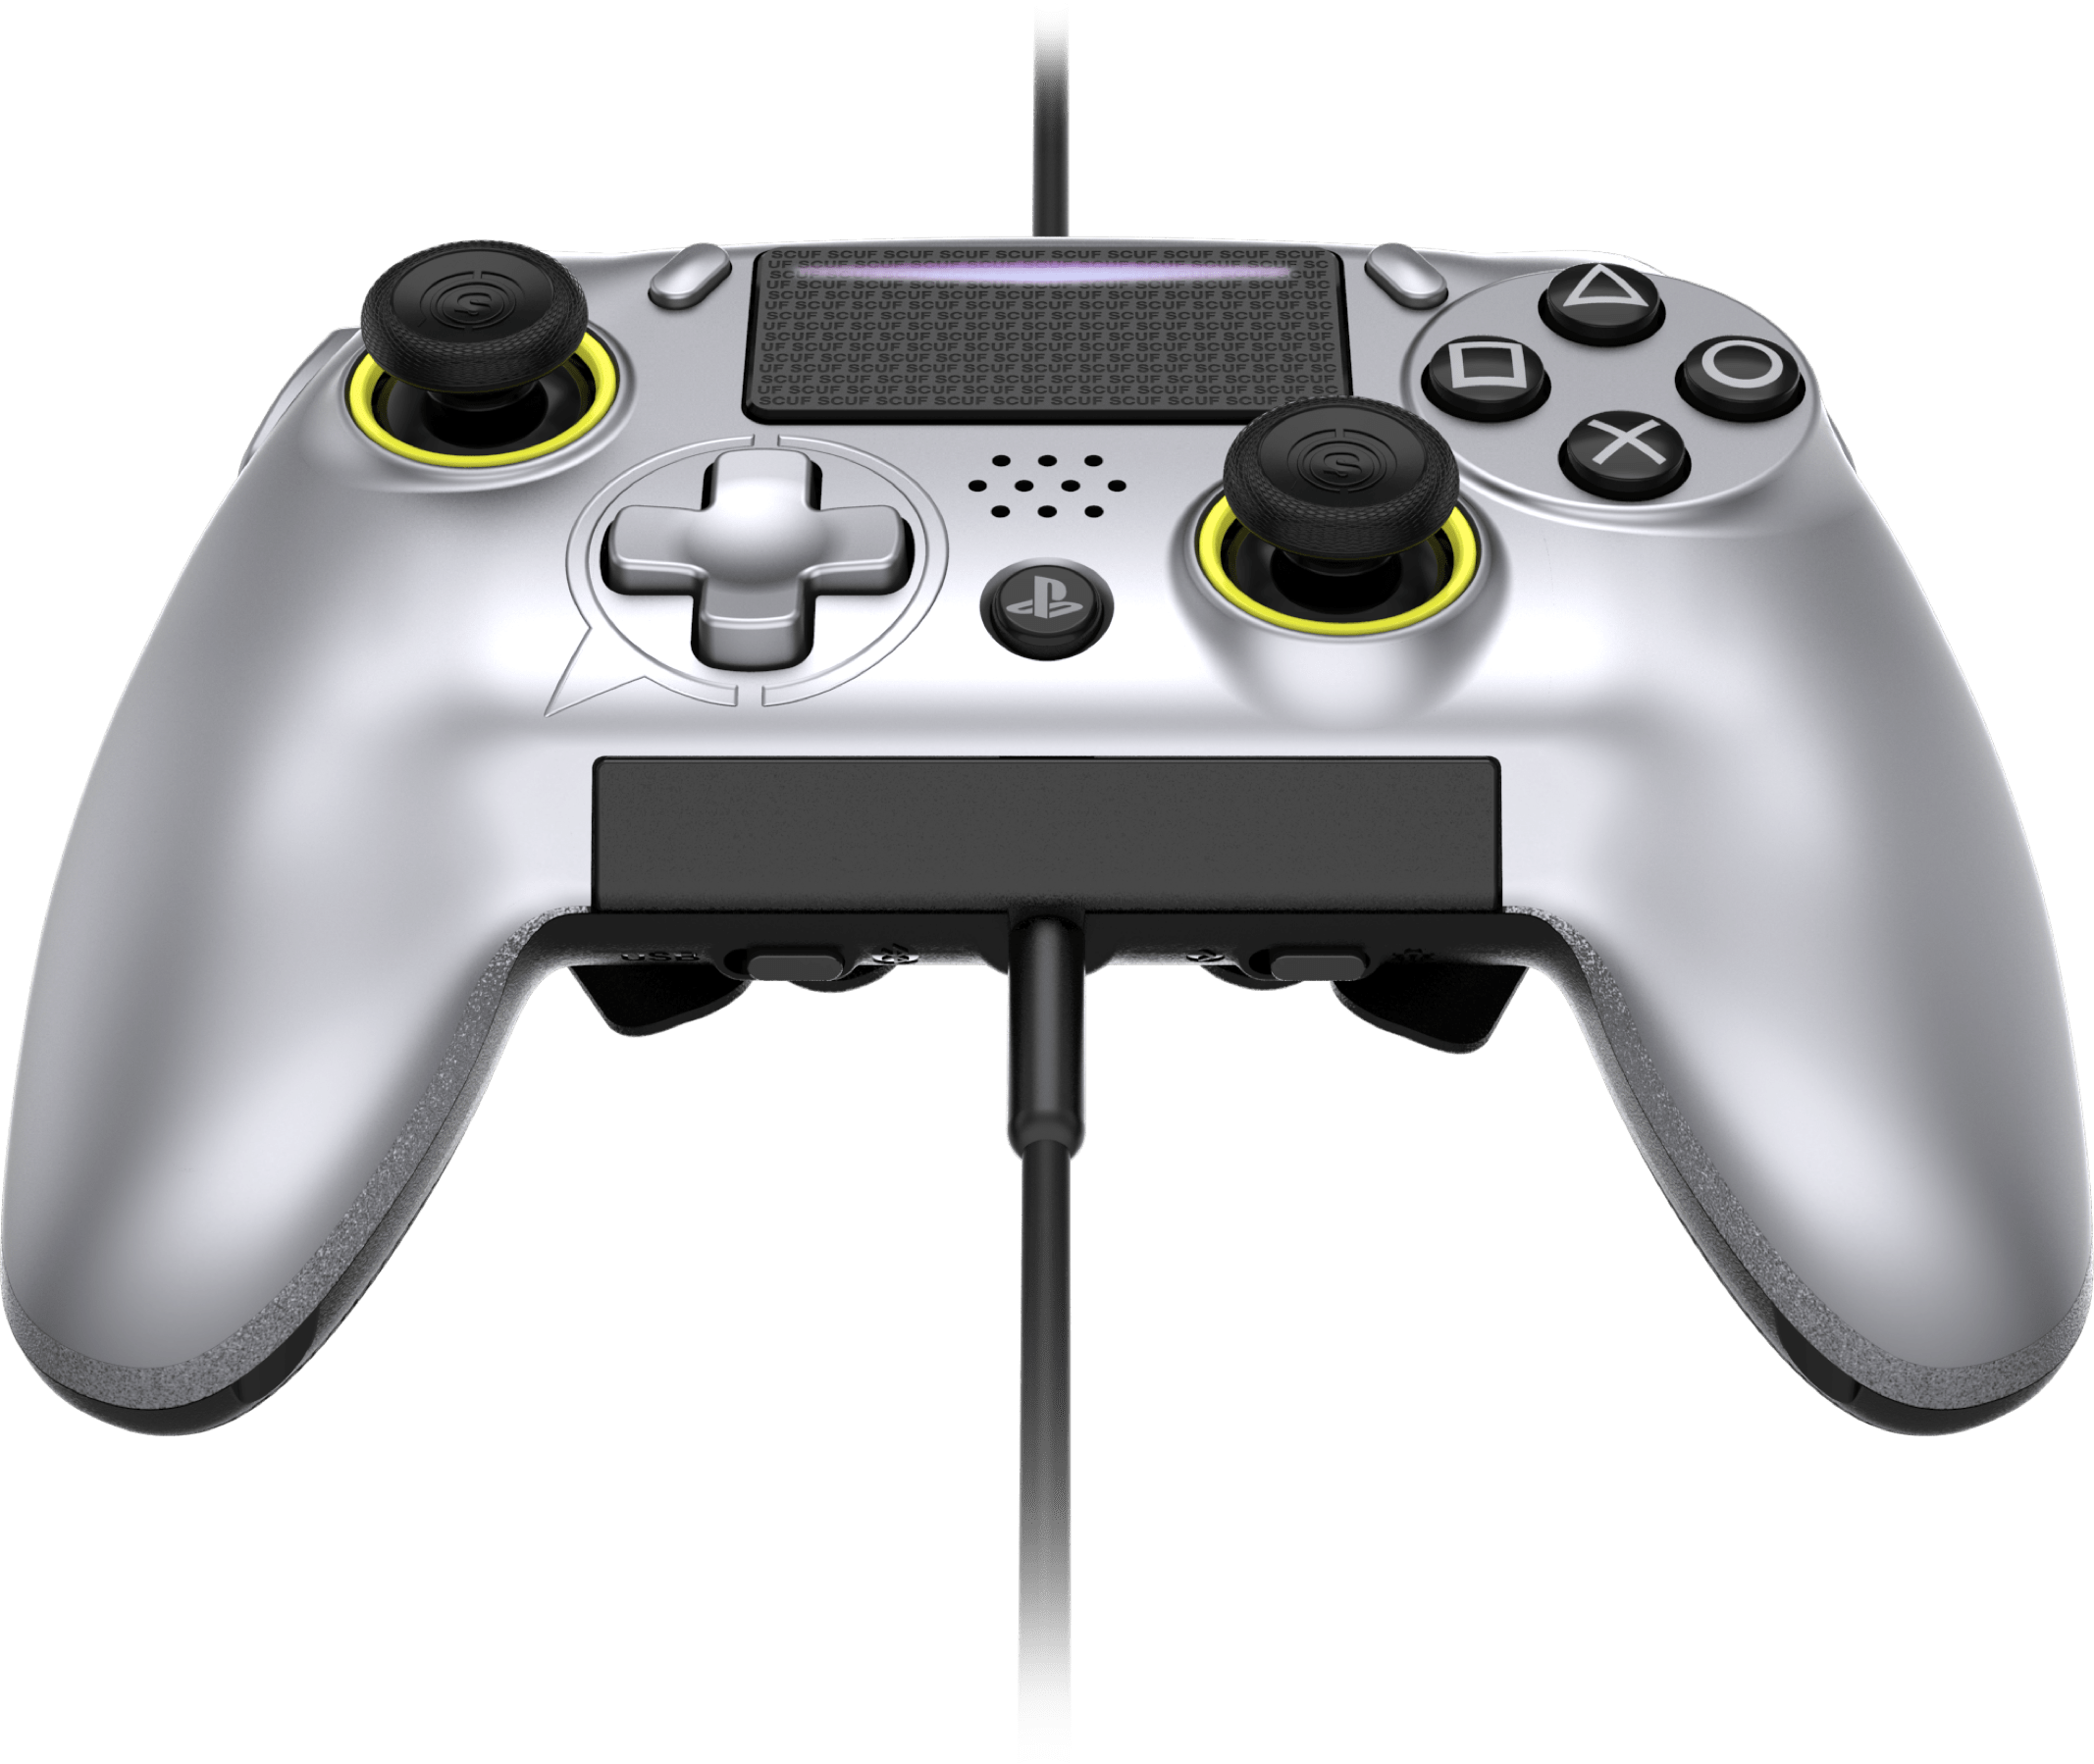 SCUF Vantage Wireless Controller For PS4 | Scuf Gaming